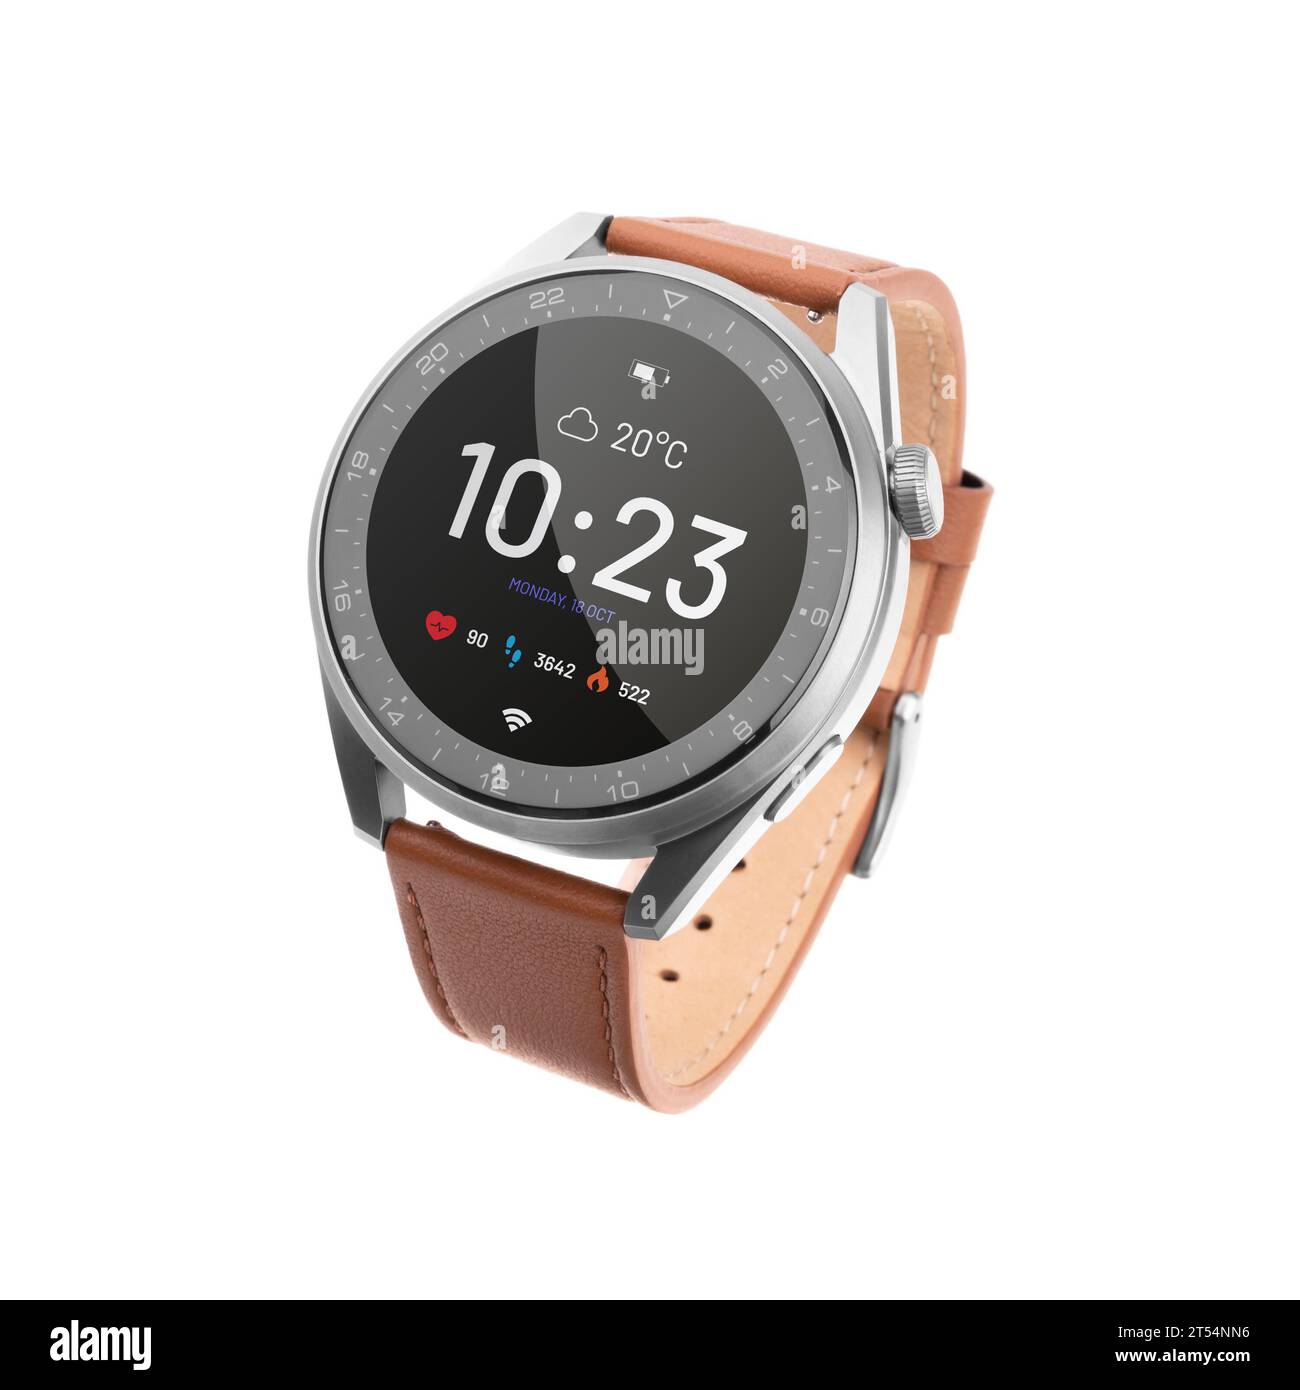 Smart watch with display on. Fashion watch with leather strap. Stock Photo